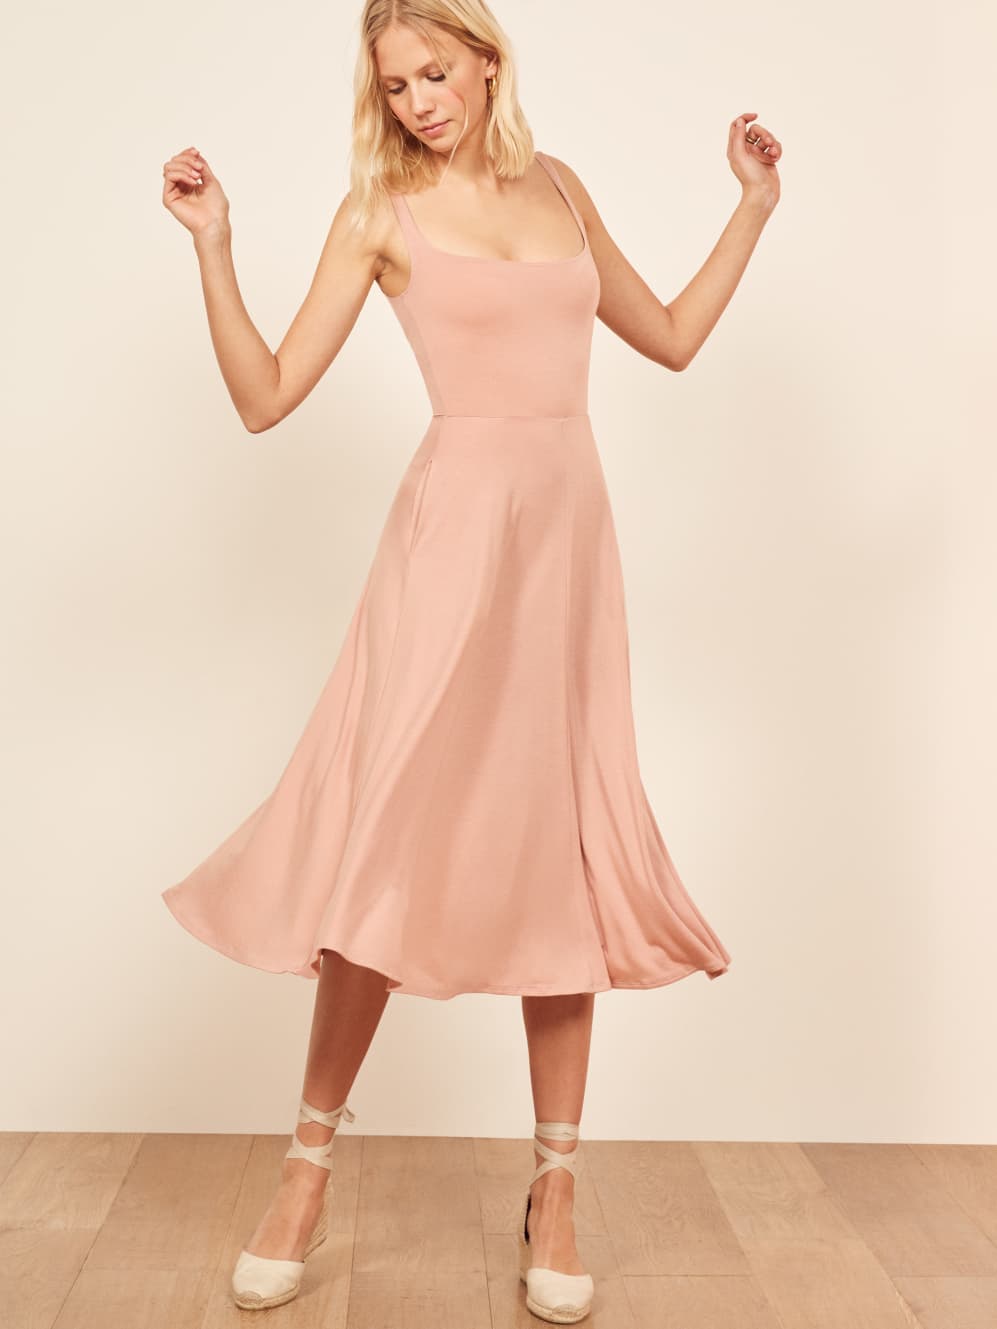 marks and spencer satin nightdress